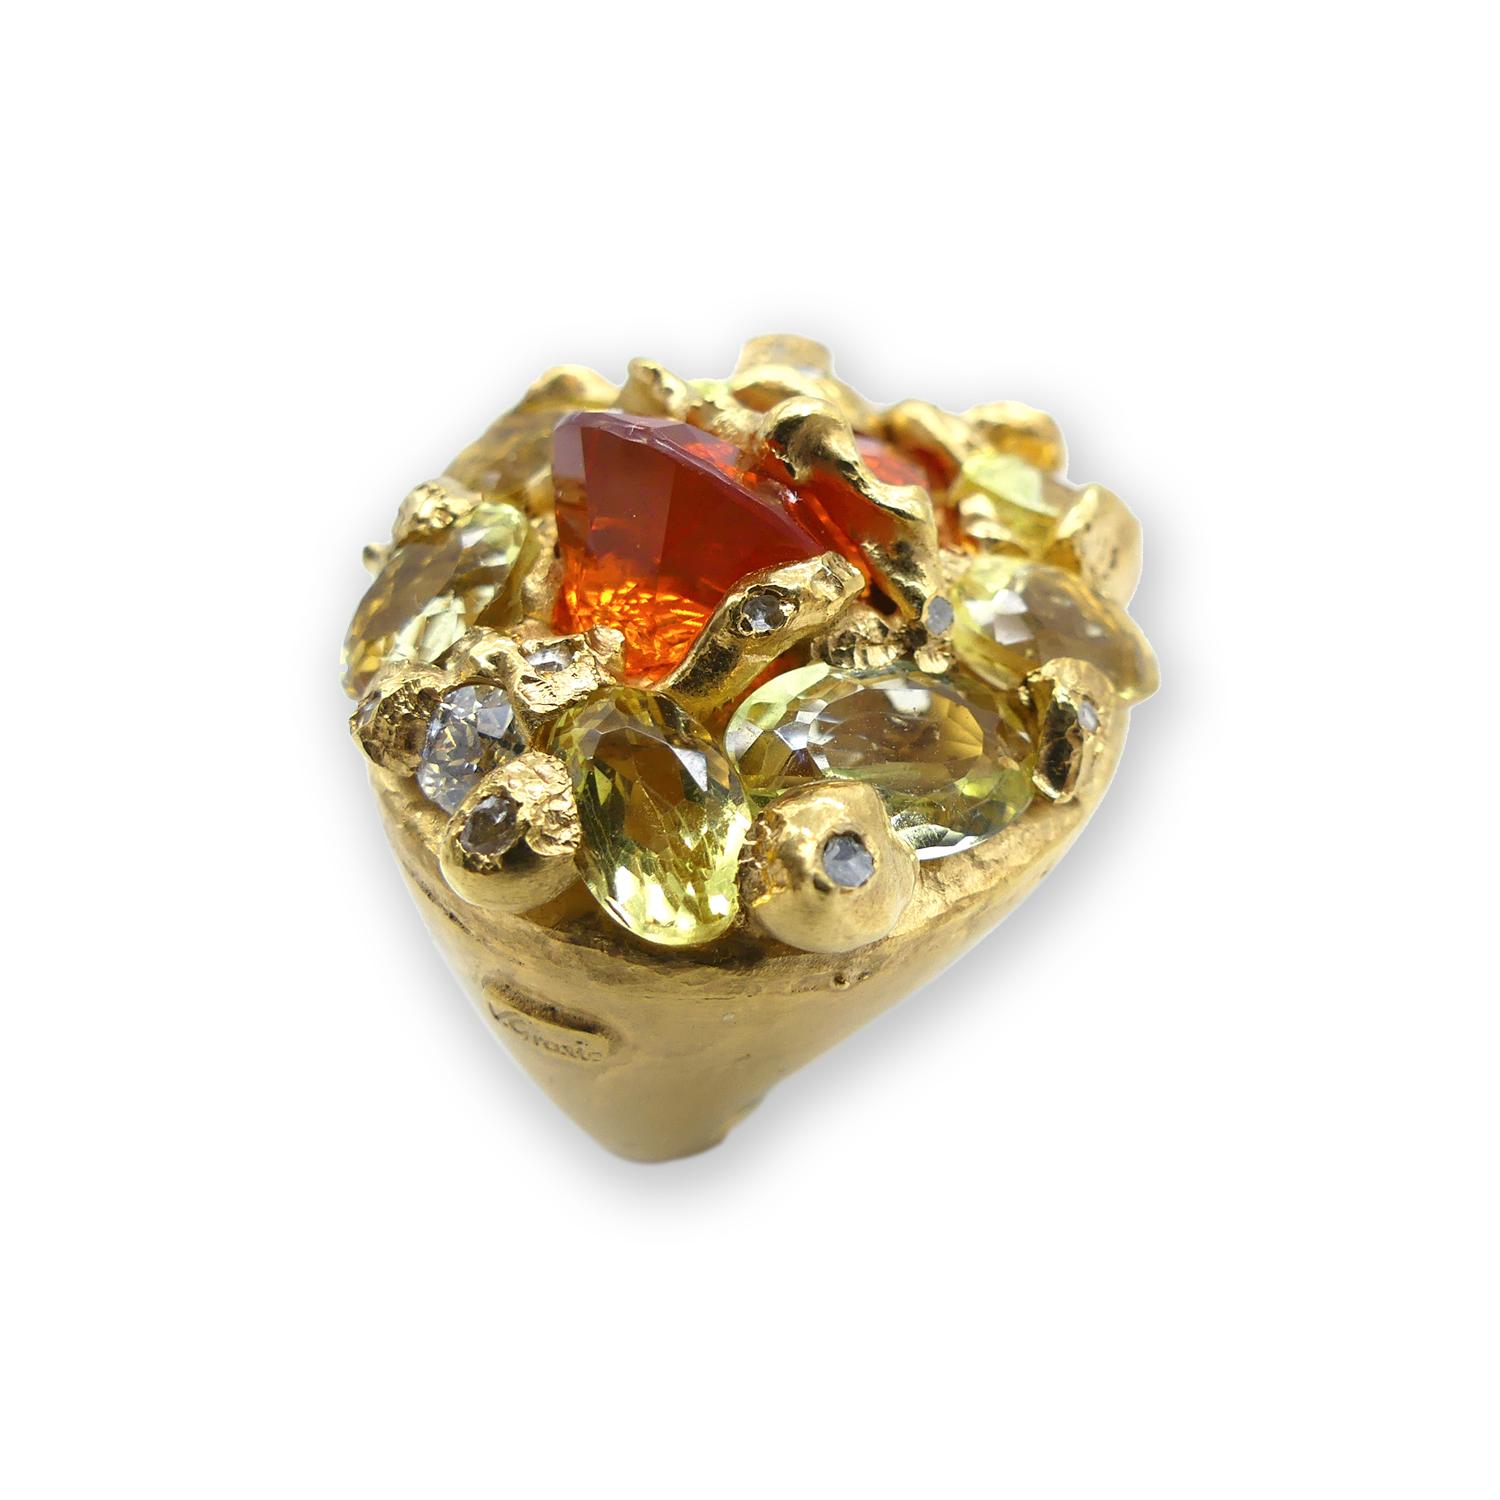 Brilliant Cut Fire Opal Citrines 0.32 Carat Diamonds Gold Plated Cocktail Ring